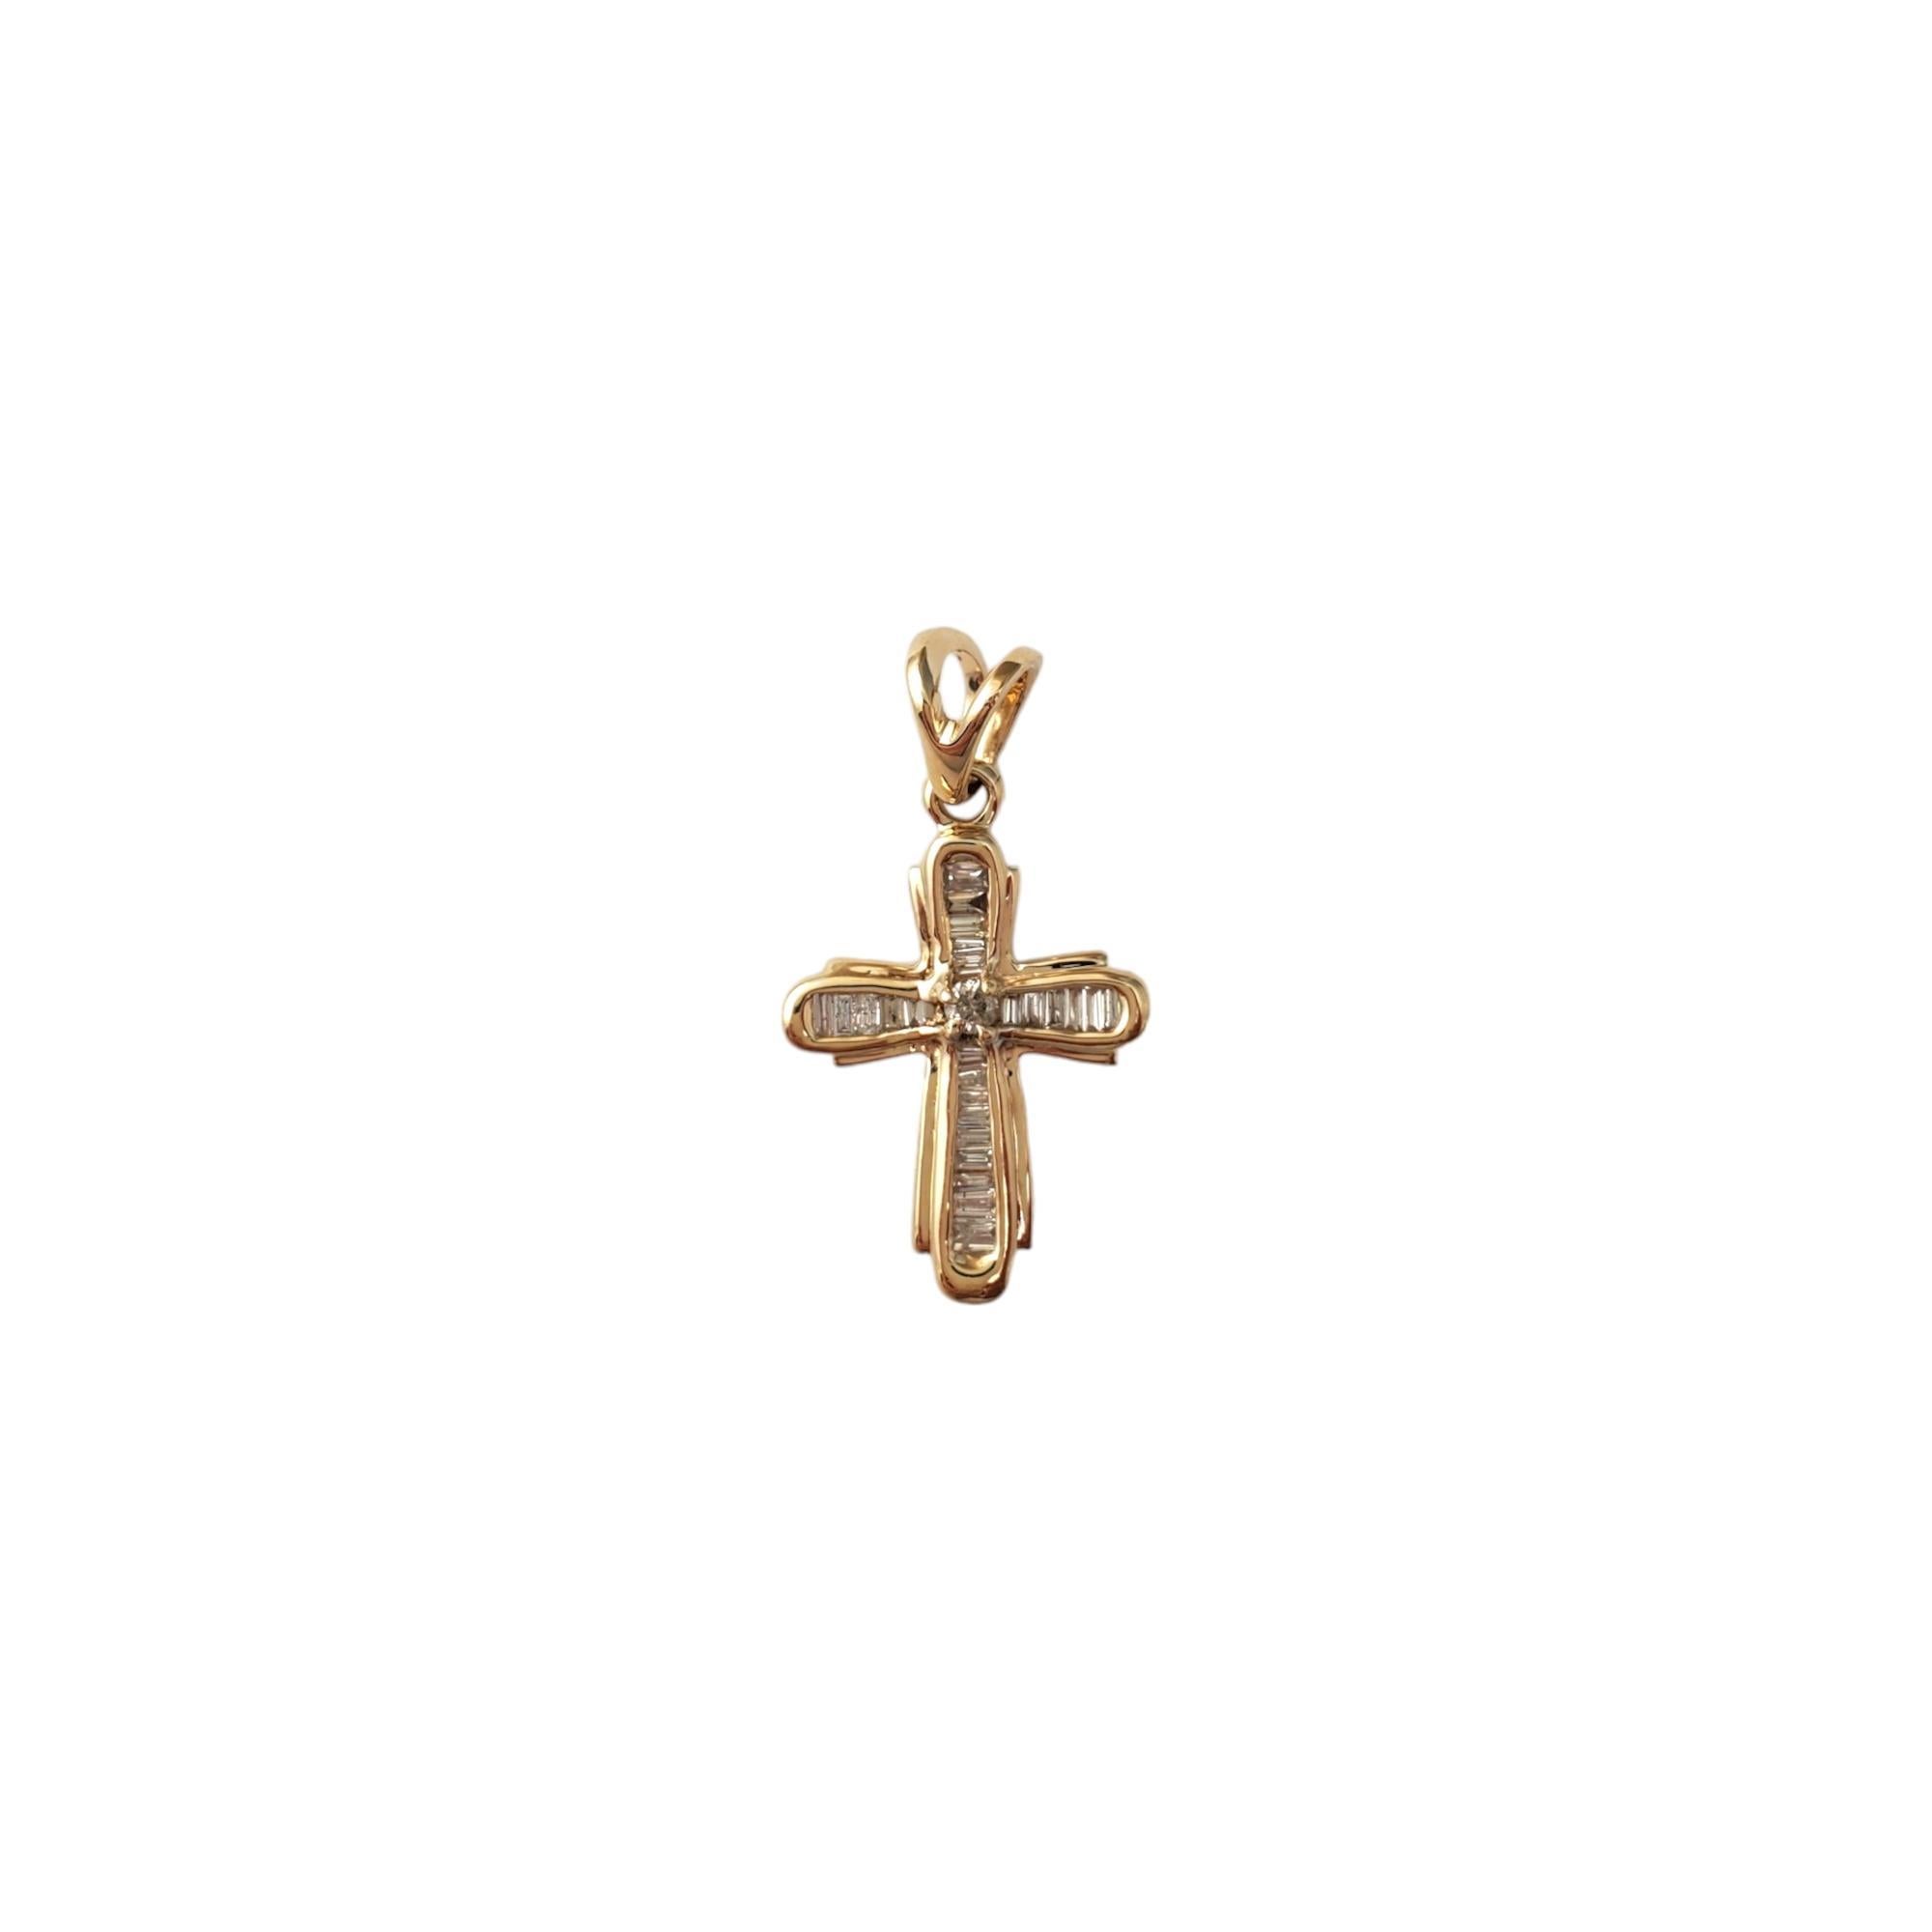 Vintage 10K Yellow Gold Diamond Cross Pendant-

This sparkling cross pendant features 26 round brilliant and baguette diamonds.

Approximate total diamond weight:  .18cts.

Diamond color:  I-J

Diamond clarity:  SI1-I2

Size:  21.6 mm  x  15.0 mm X